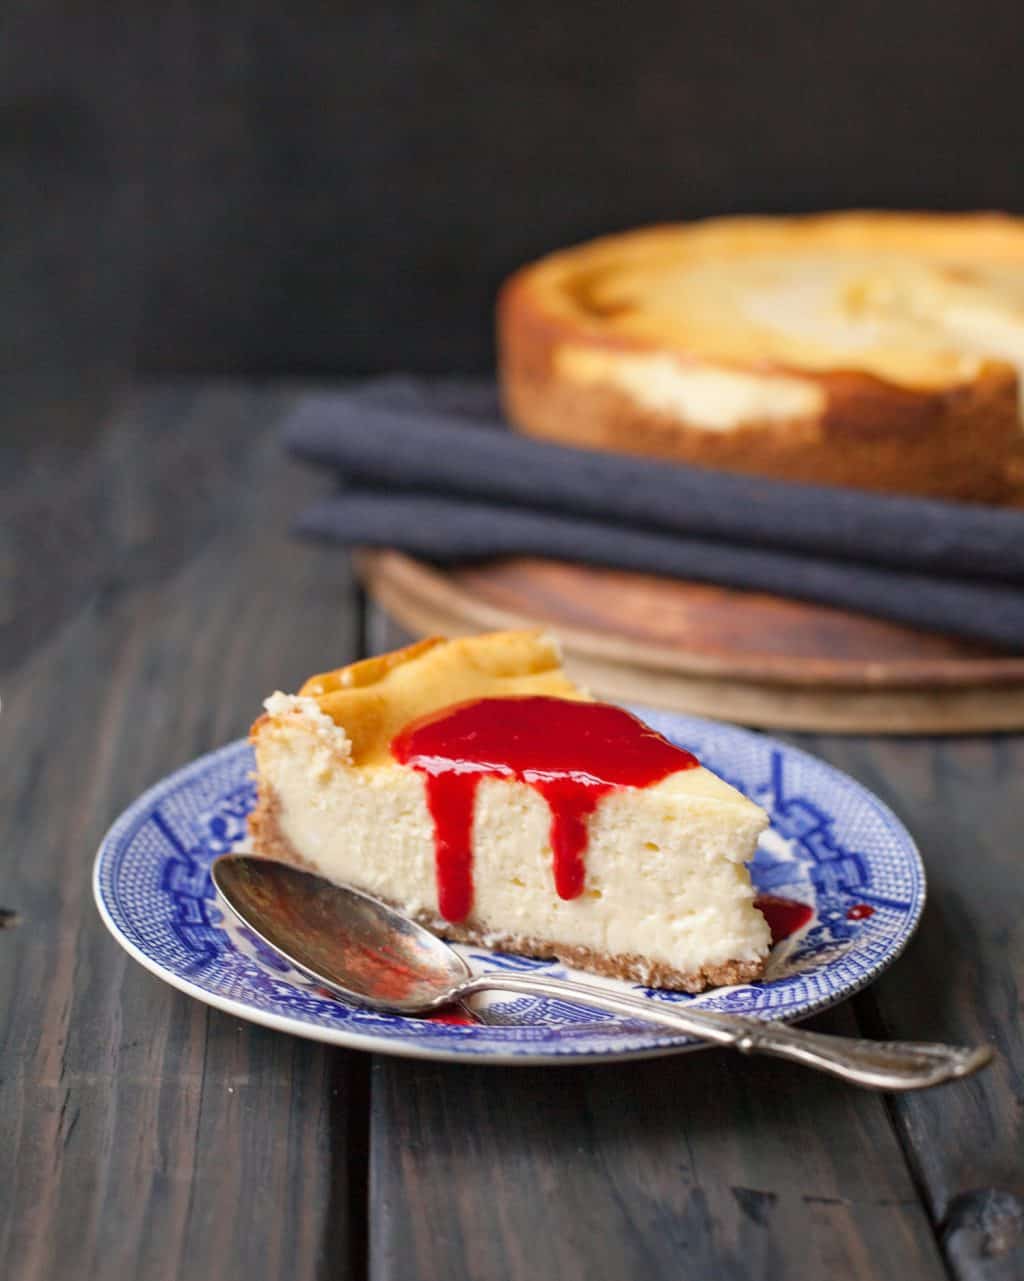 A simple, classic cheesecake topped with tangy raspberry sauce doesn't have to be complicated. Get all the tips and secrets here.